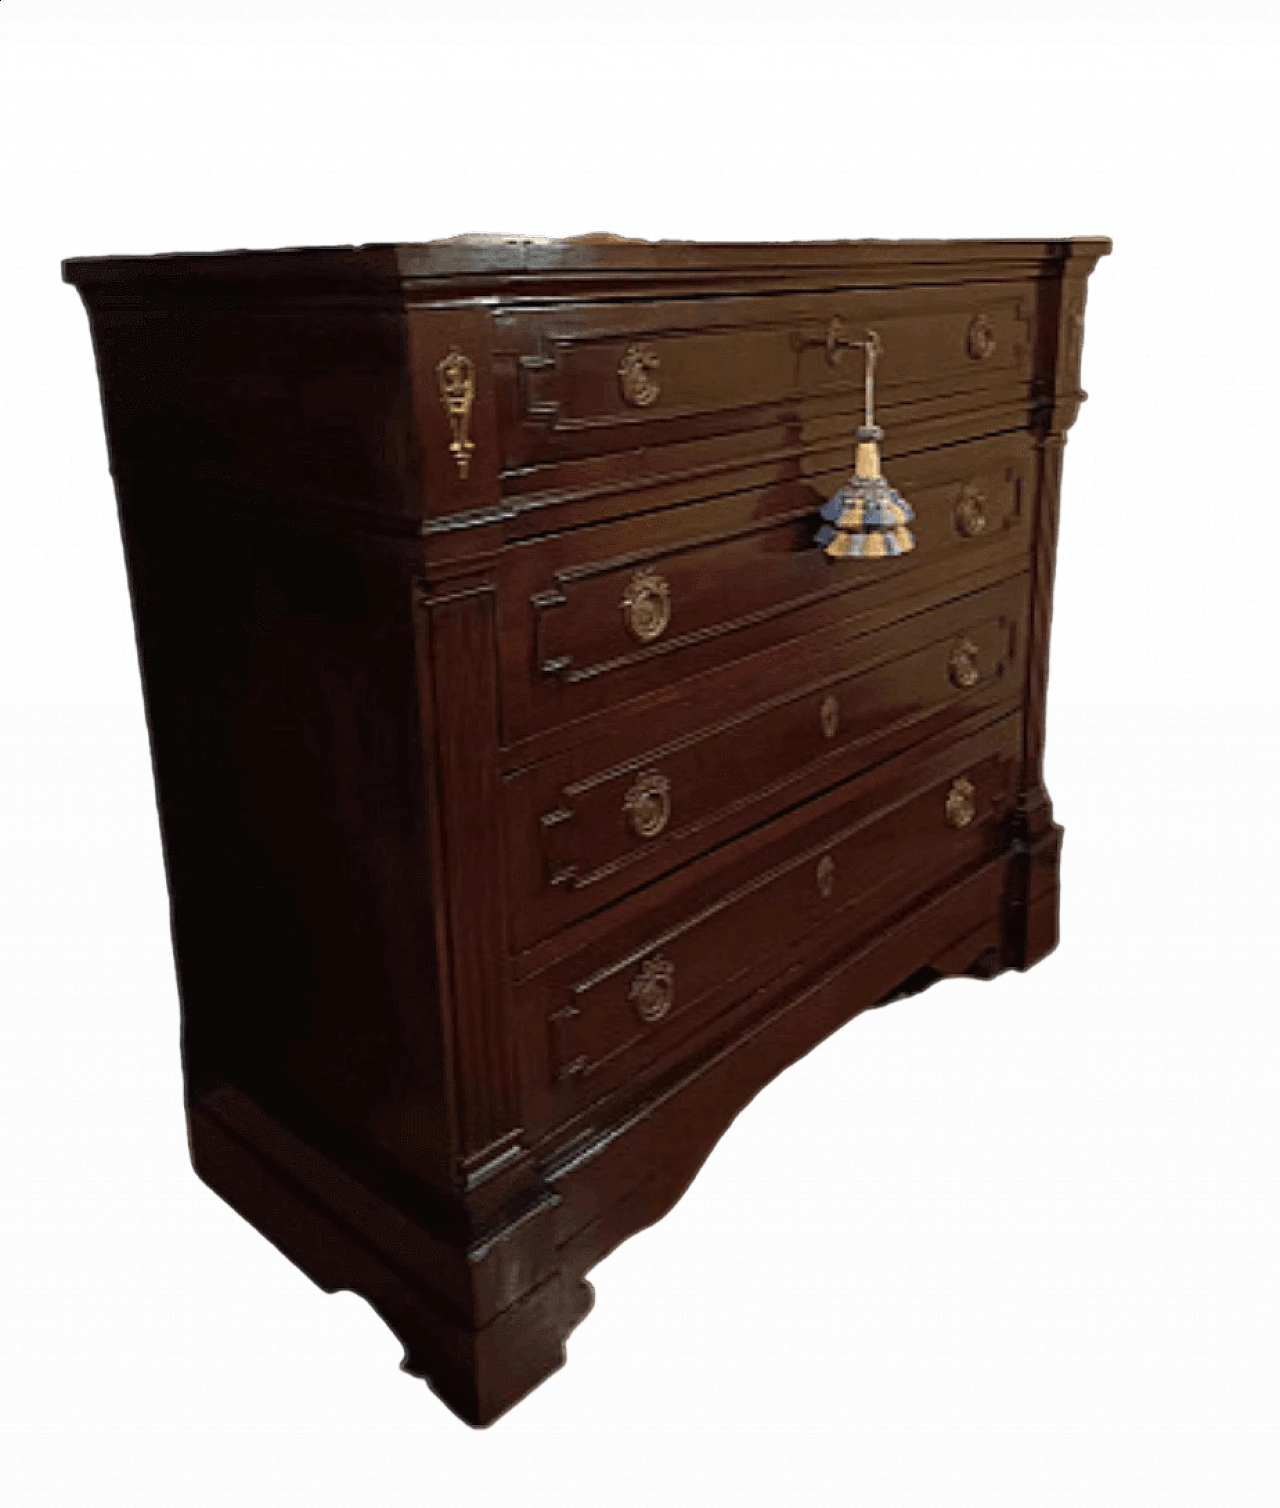 Mahogany Empire chest of drawers with gilt bronze friezes and handles, 19th century 5